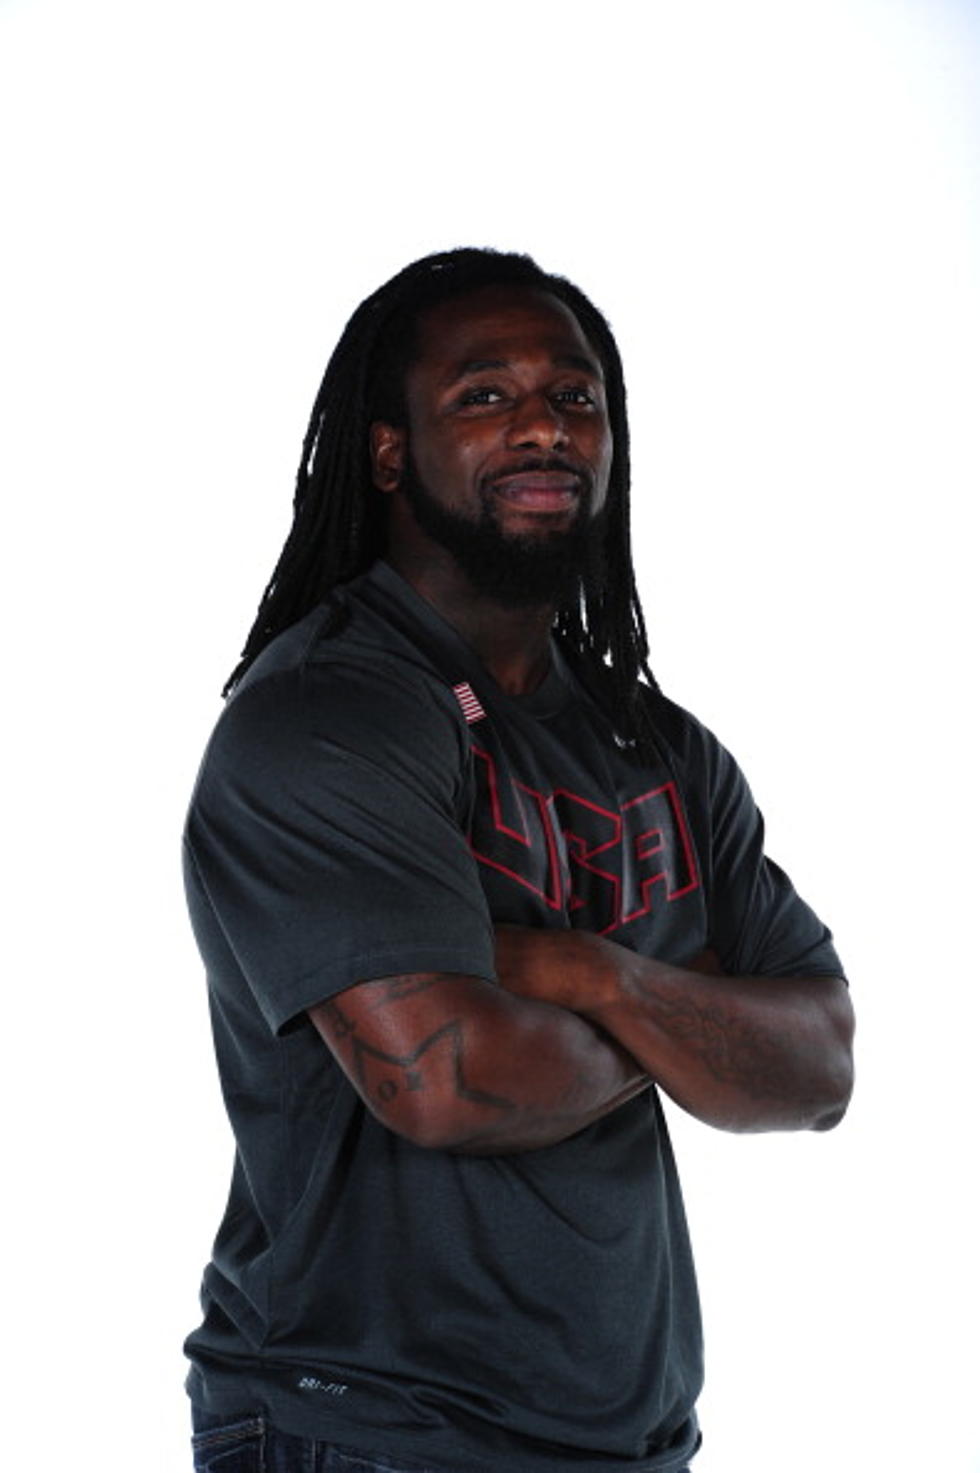 Interview With World Famous Weightlifter Kendrick Farris